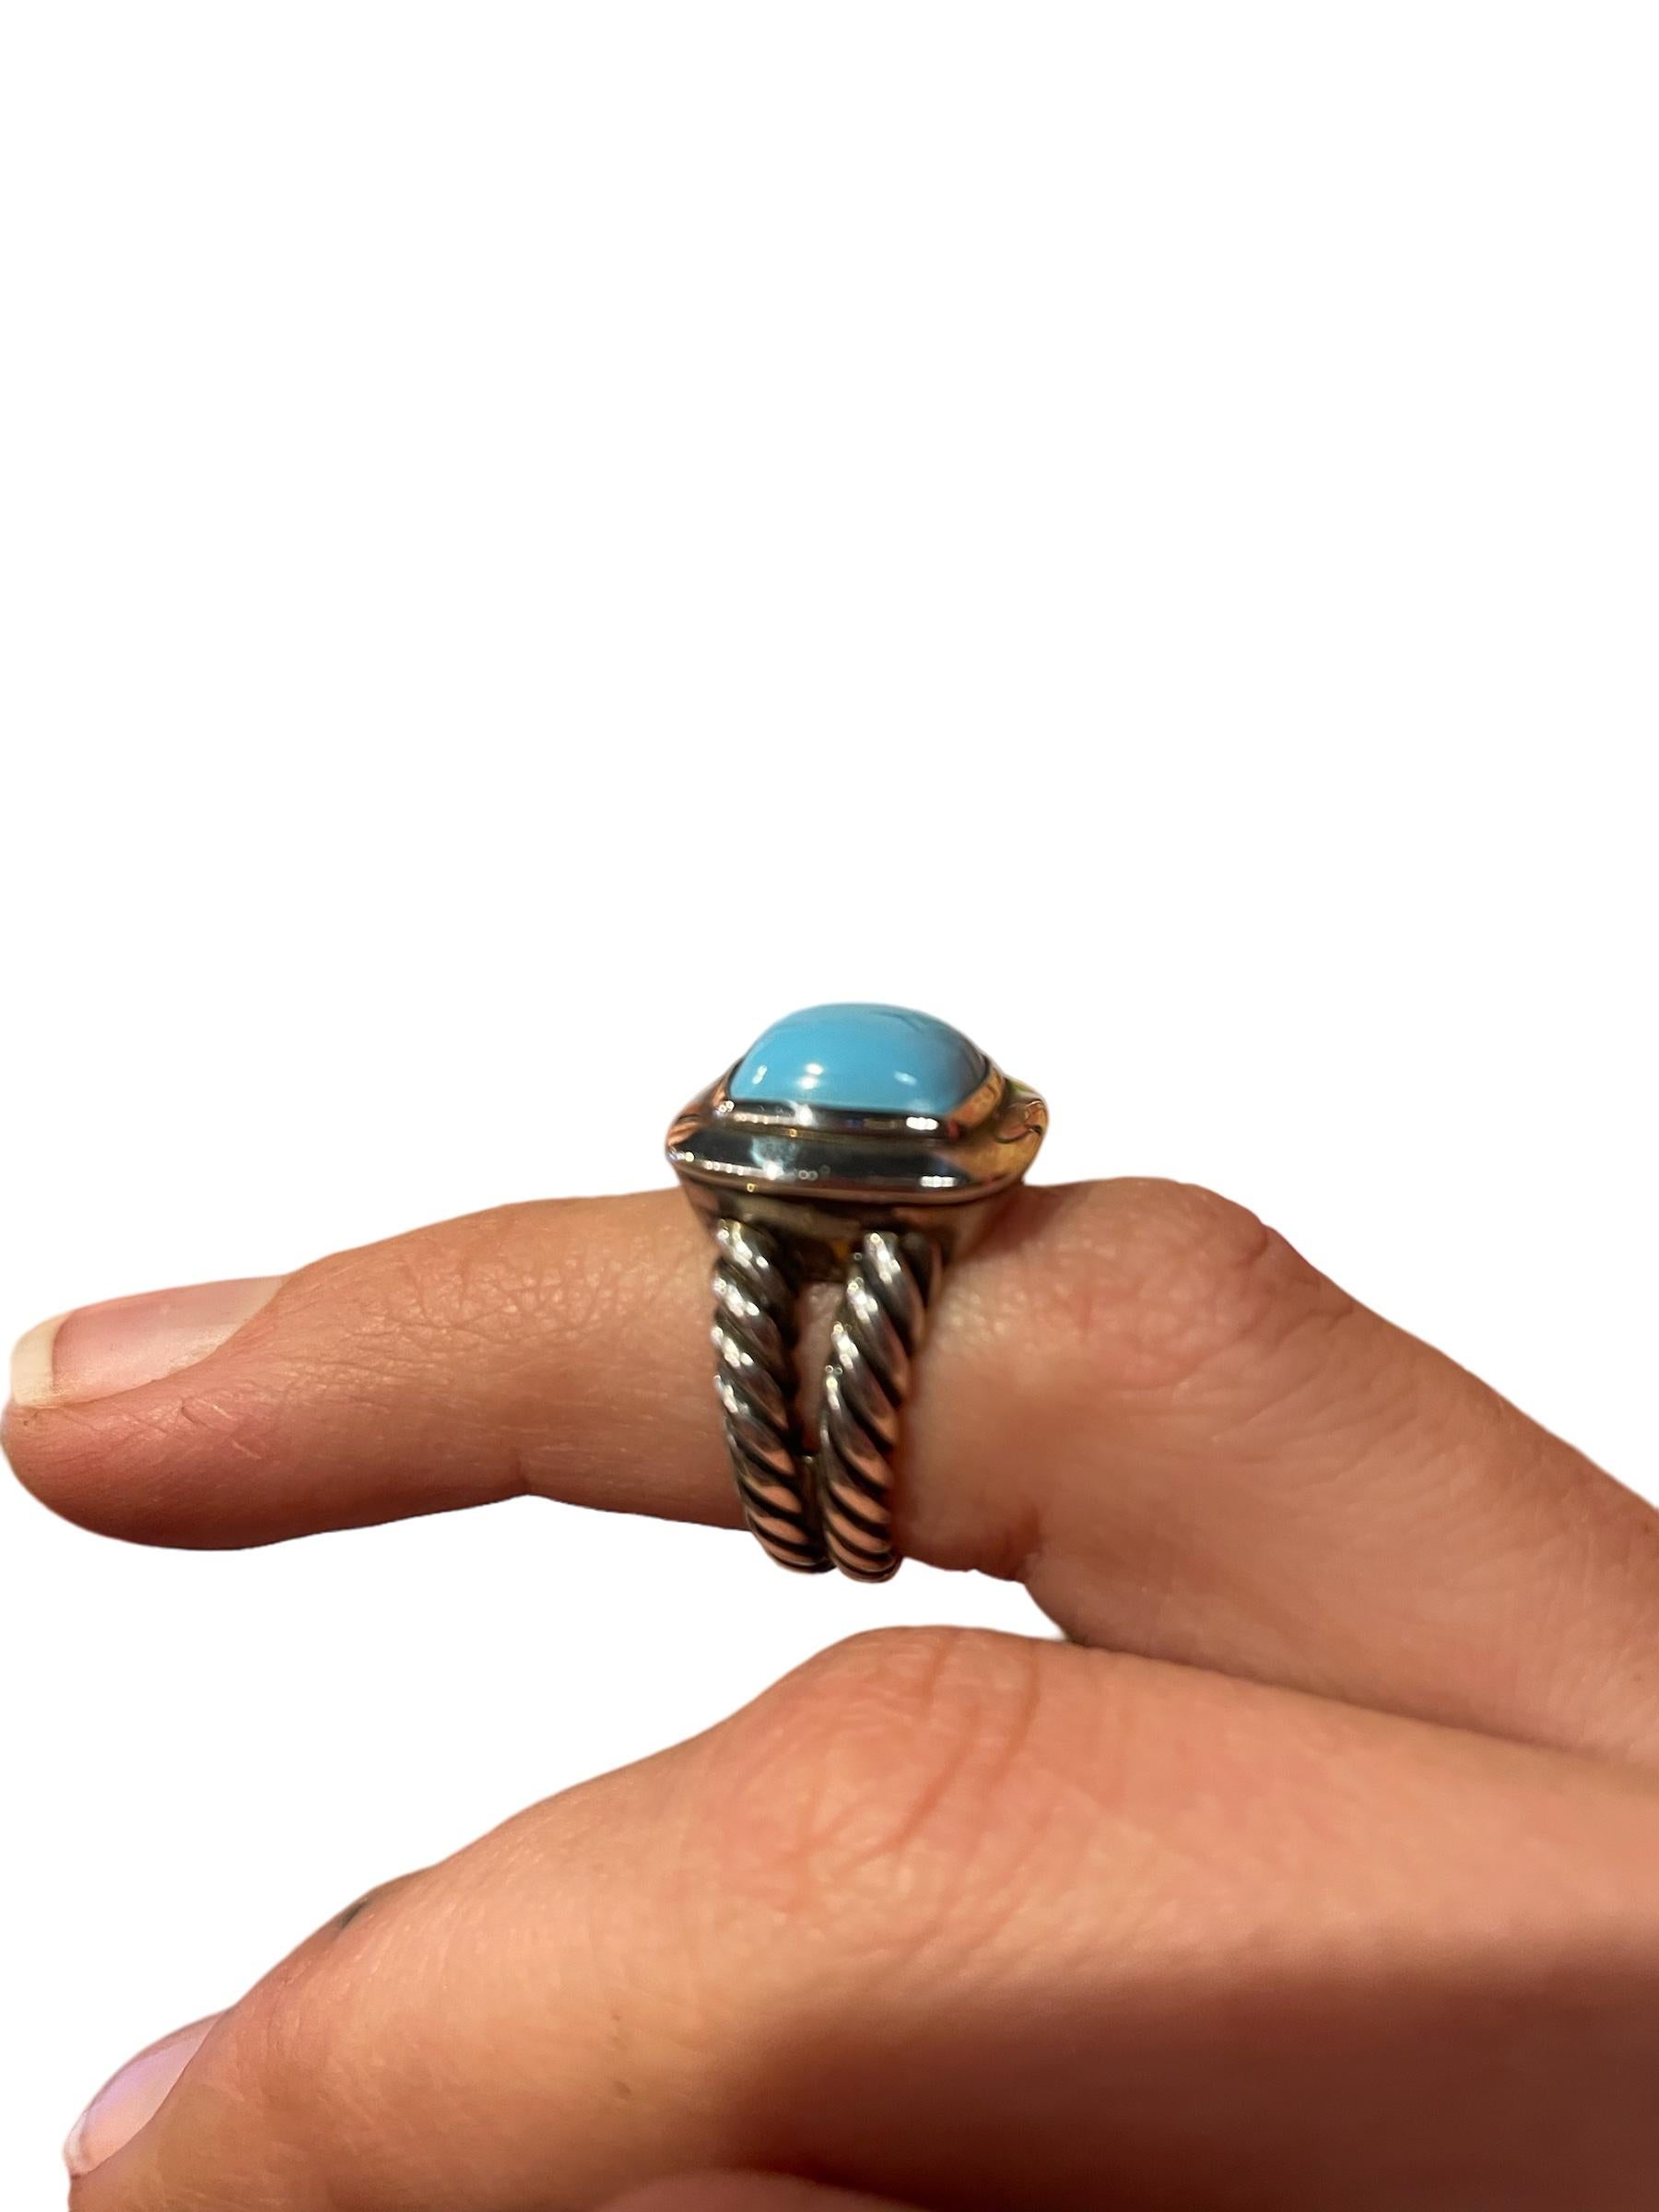 Contemporary Authentic David Yurman Turquoise Albion Ring 